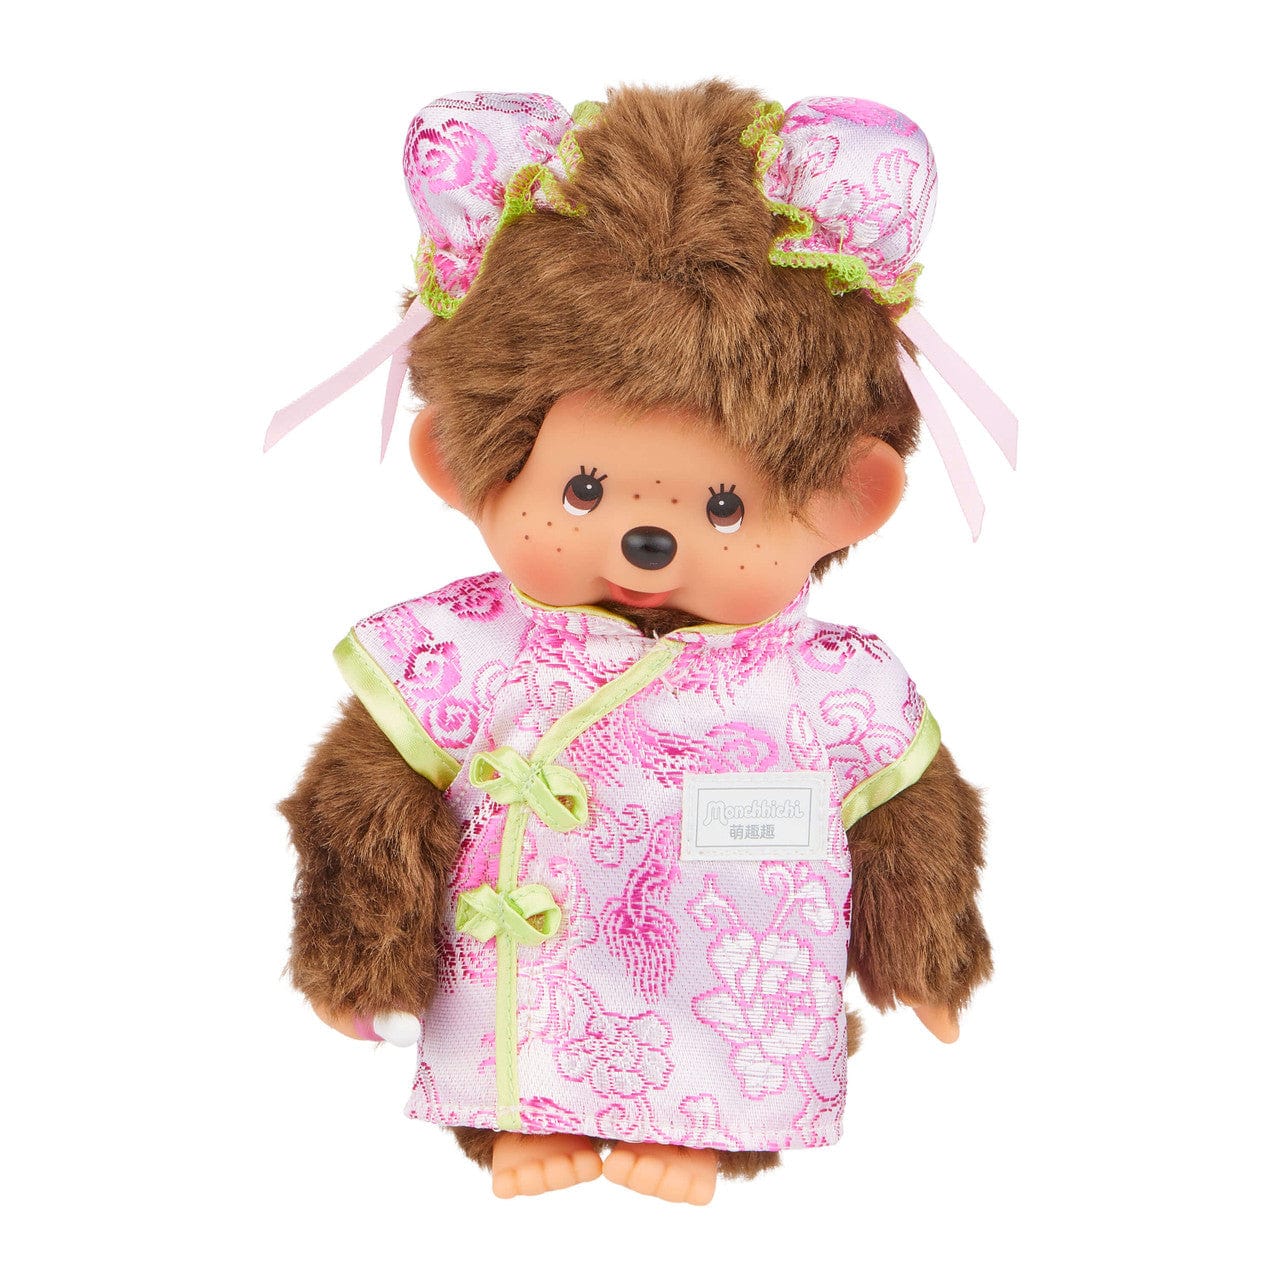 Monchhichi Girl in Traditional Chinese Dress